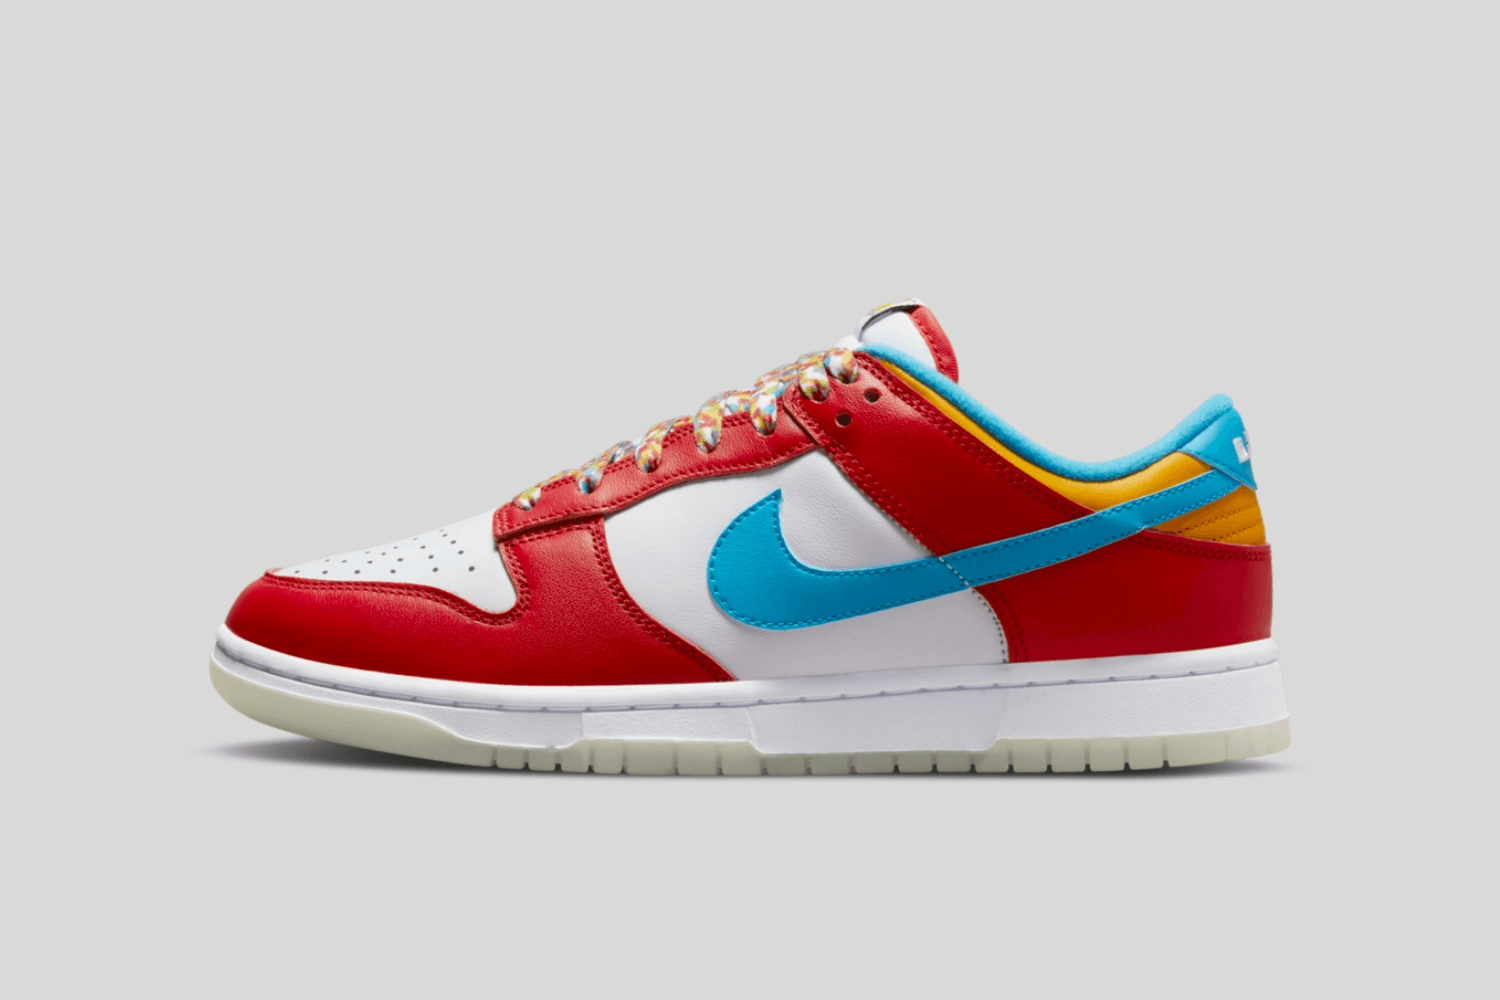 LeBron James and Nike are working on a 'Fruity Pebbles' Dunk Low